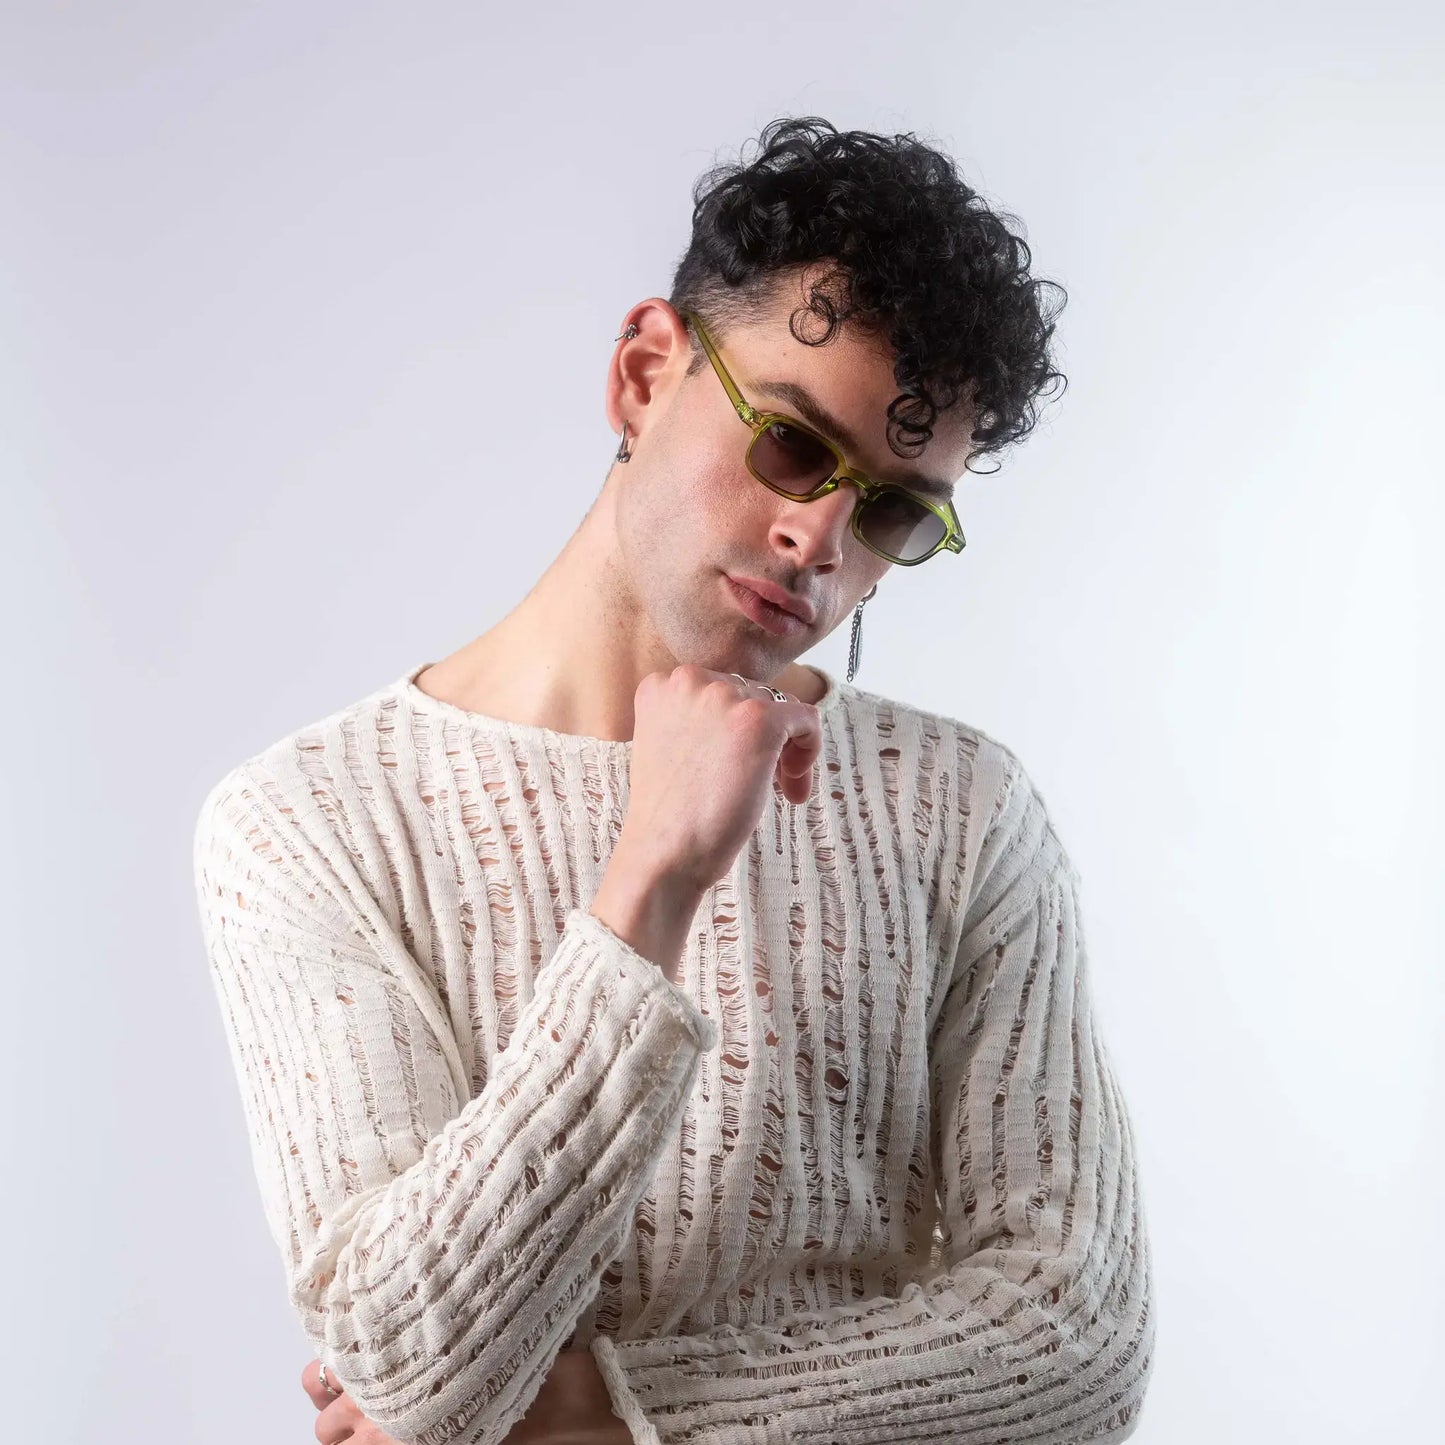 A male model wearing Exposure Sunglasses polarized sunglasses with green frames and green lenses, posing against a white background.